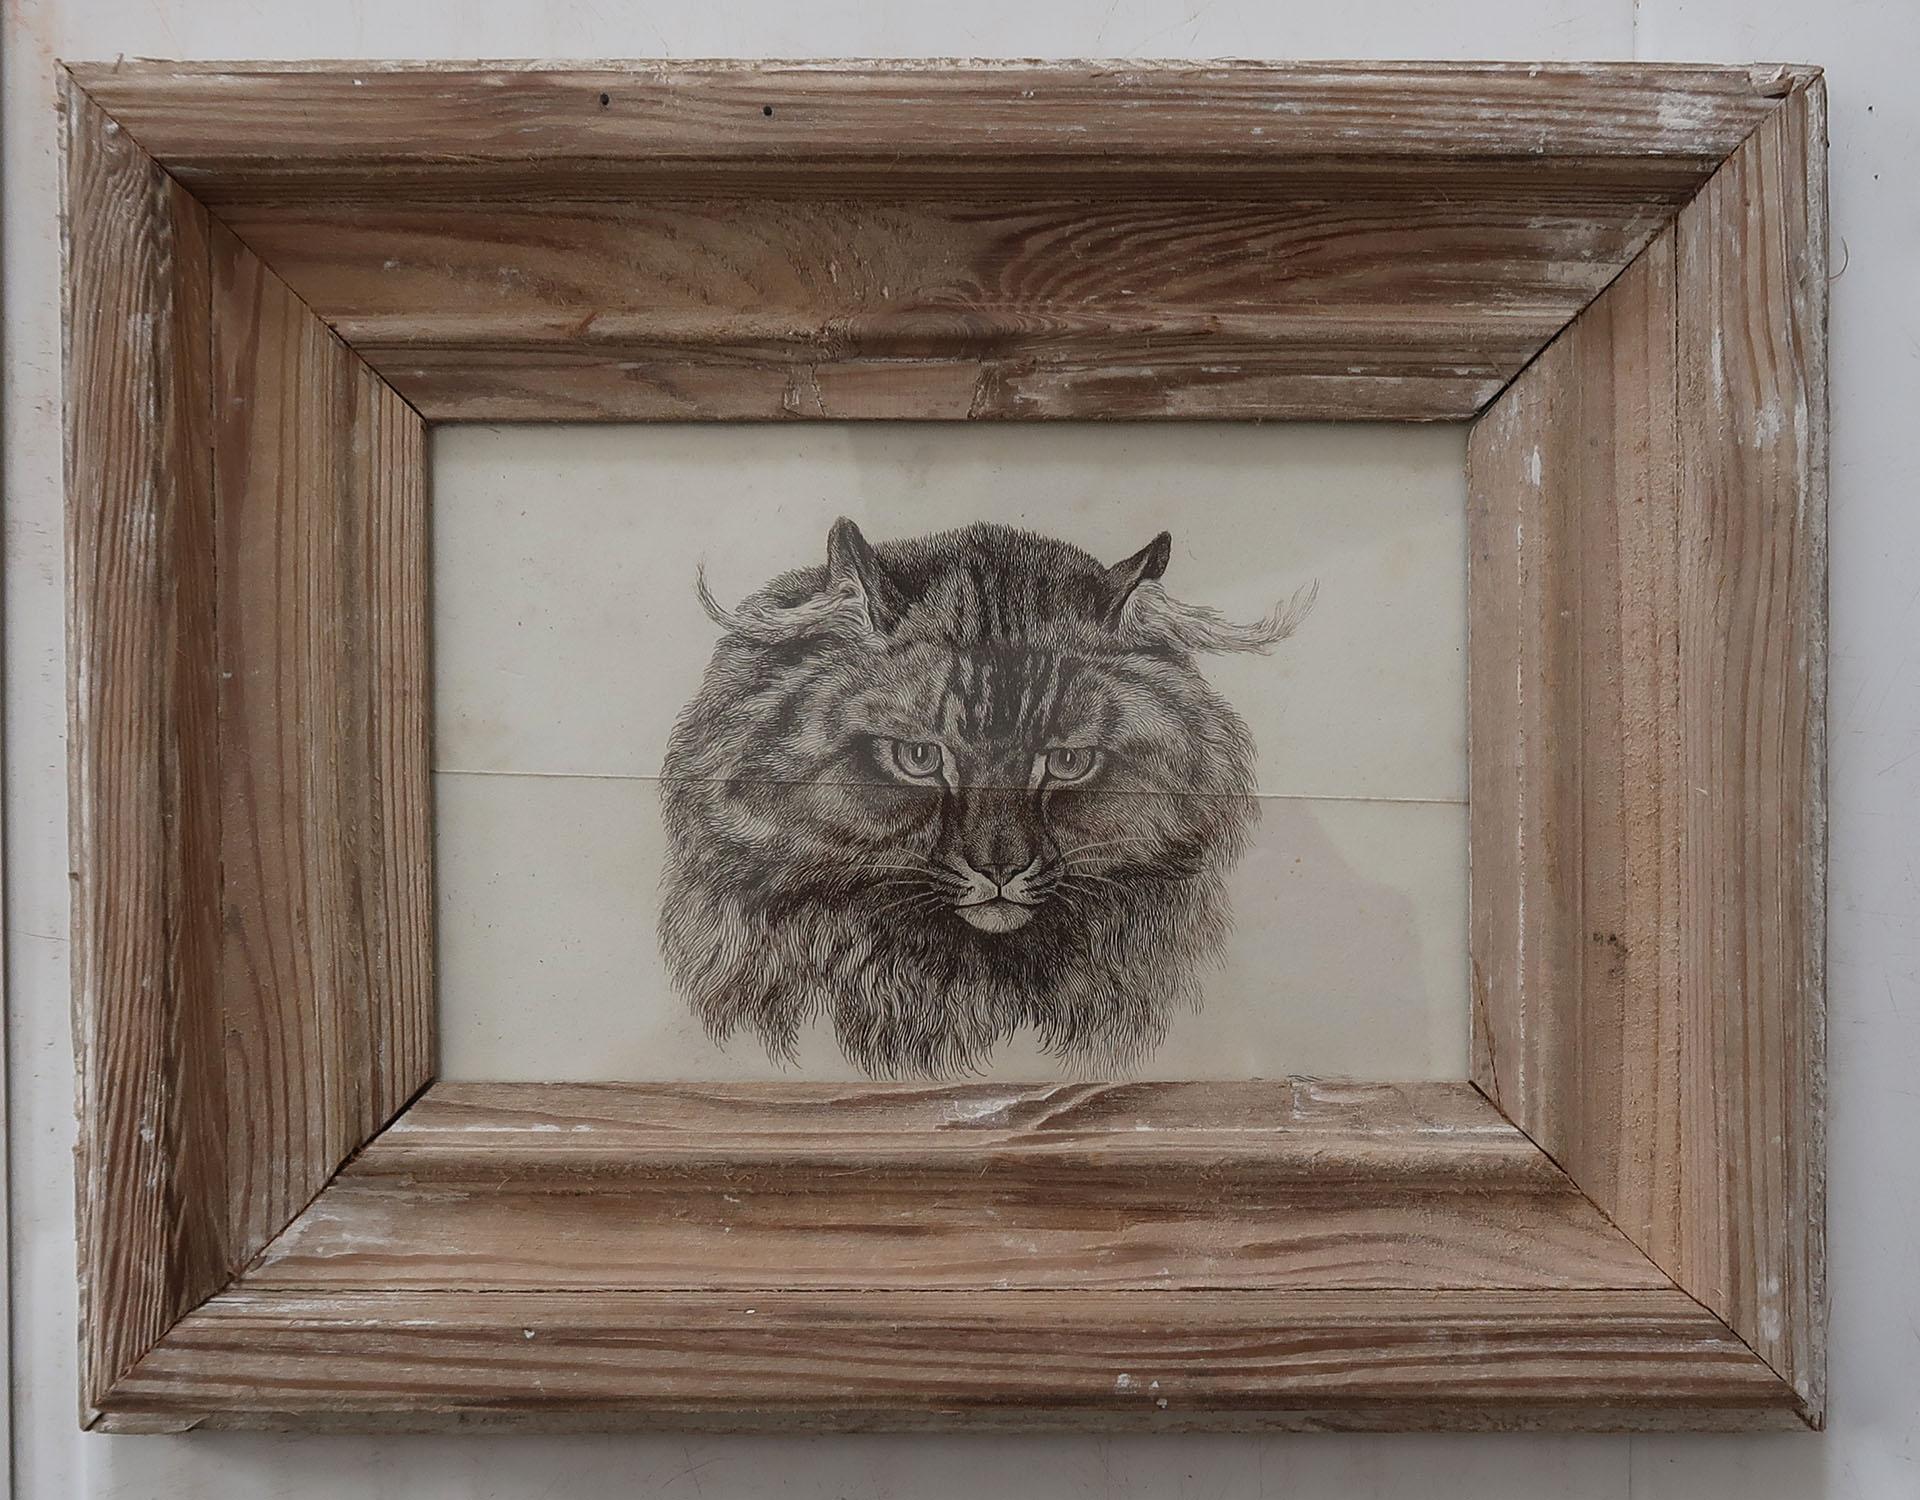 Great image of a cat presented in an antique distressed pine frame

Copper-plate engraving after Landseer

Published About 1840

There is a single horizontal crease through the centre of the print

The measurement below is the frame